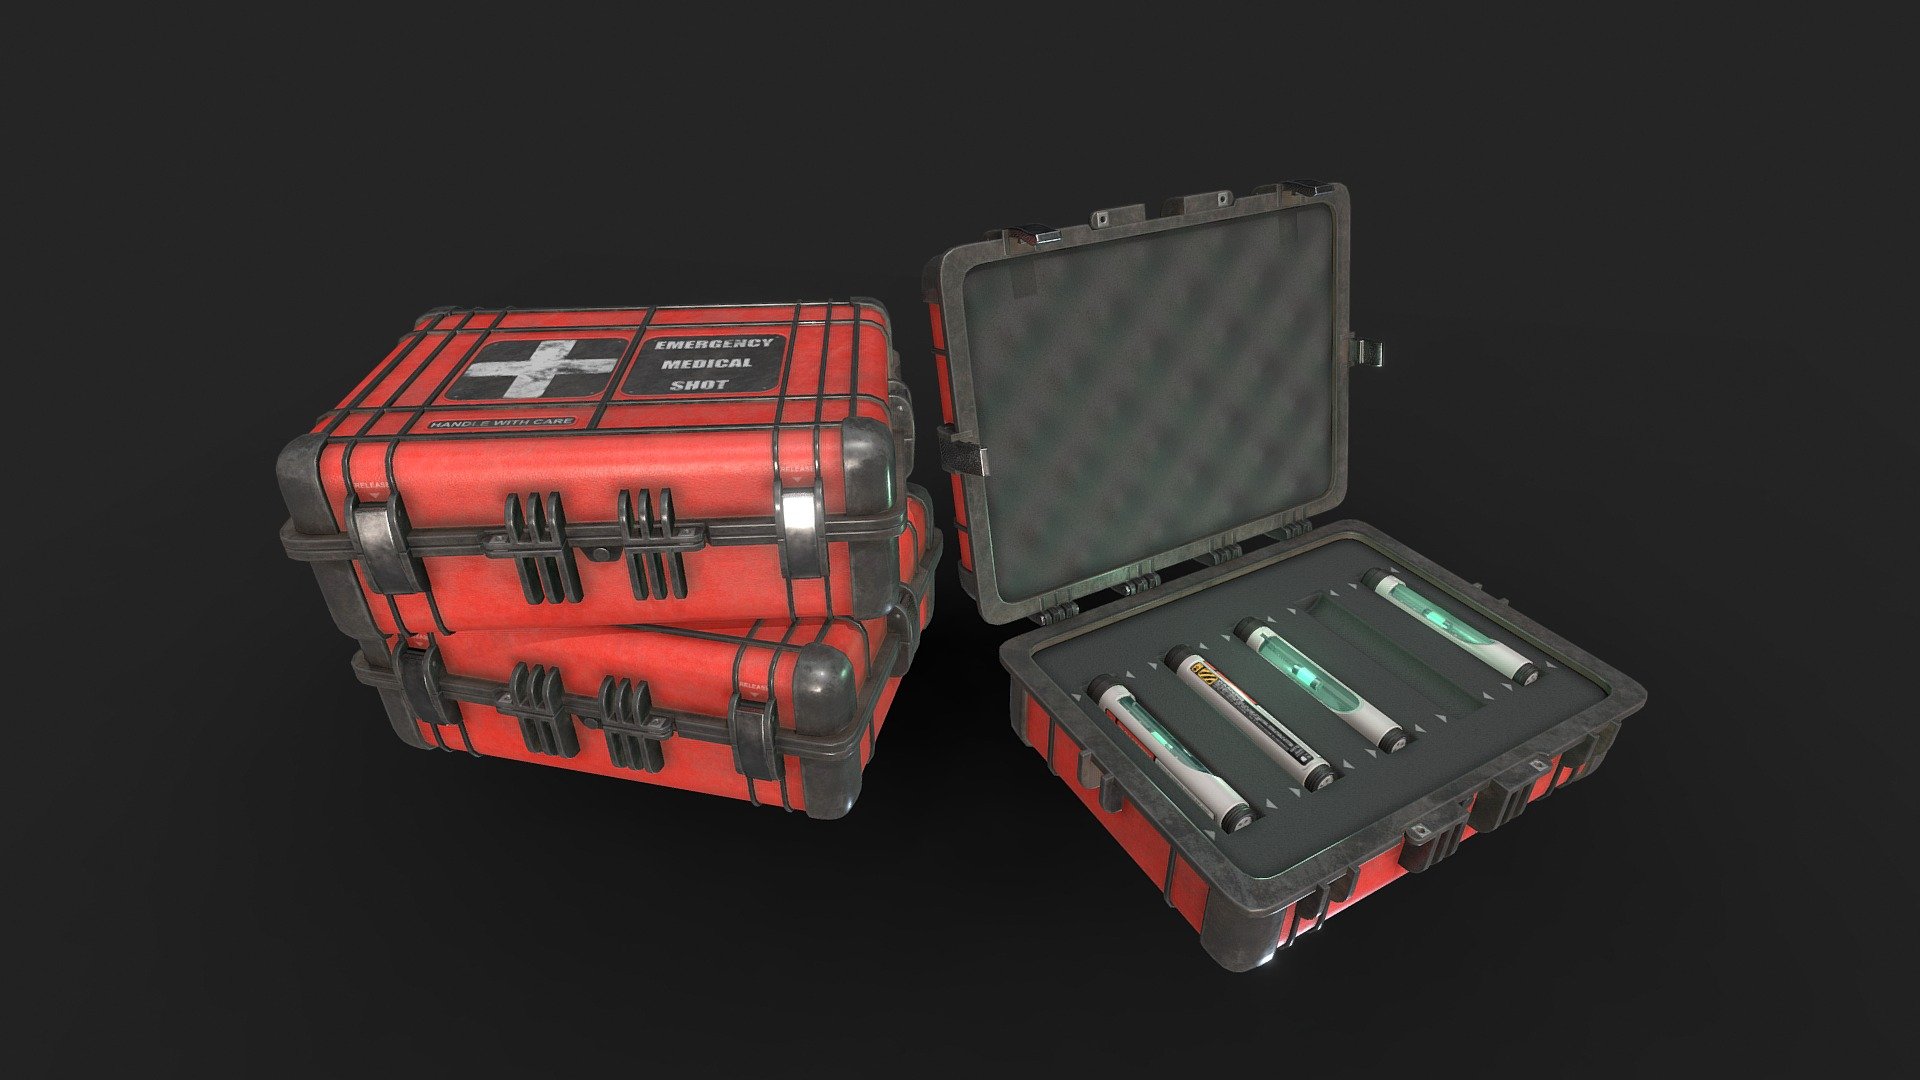 A medical case containing some stimpacks for combat use.
Stimpacks ~1.6k Polys 1k Texture Set ; Glass 512px Texture Set
Hard Case ~5.5k Polys 2k Texture Set - Medical Hard Case - 3D model by Rico Peters (@ryko777) 3d model